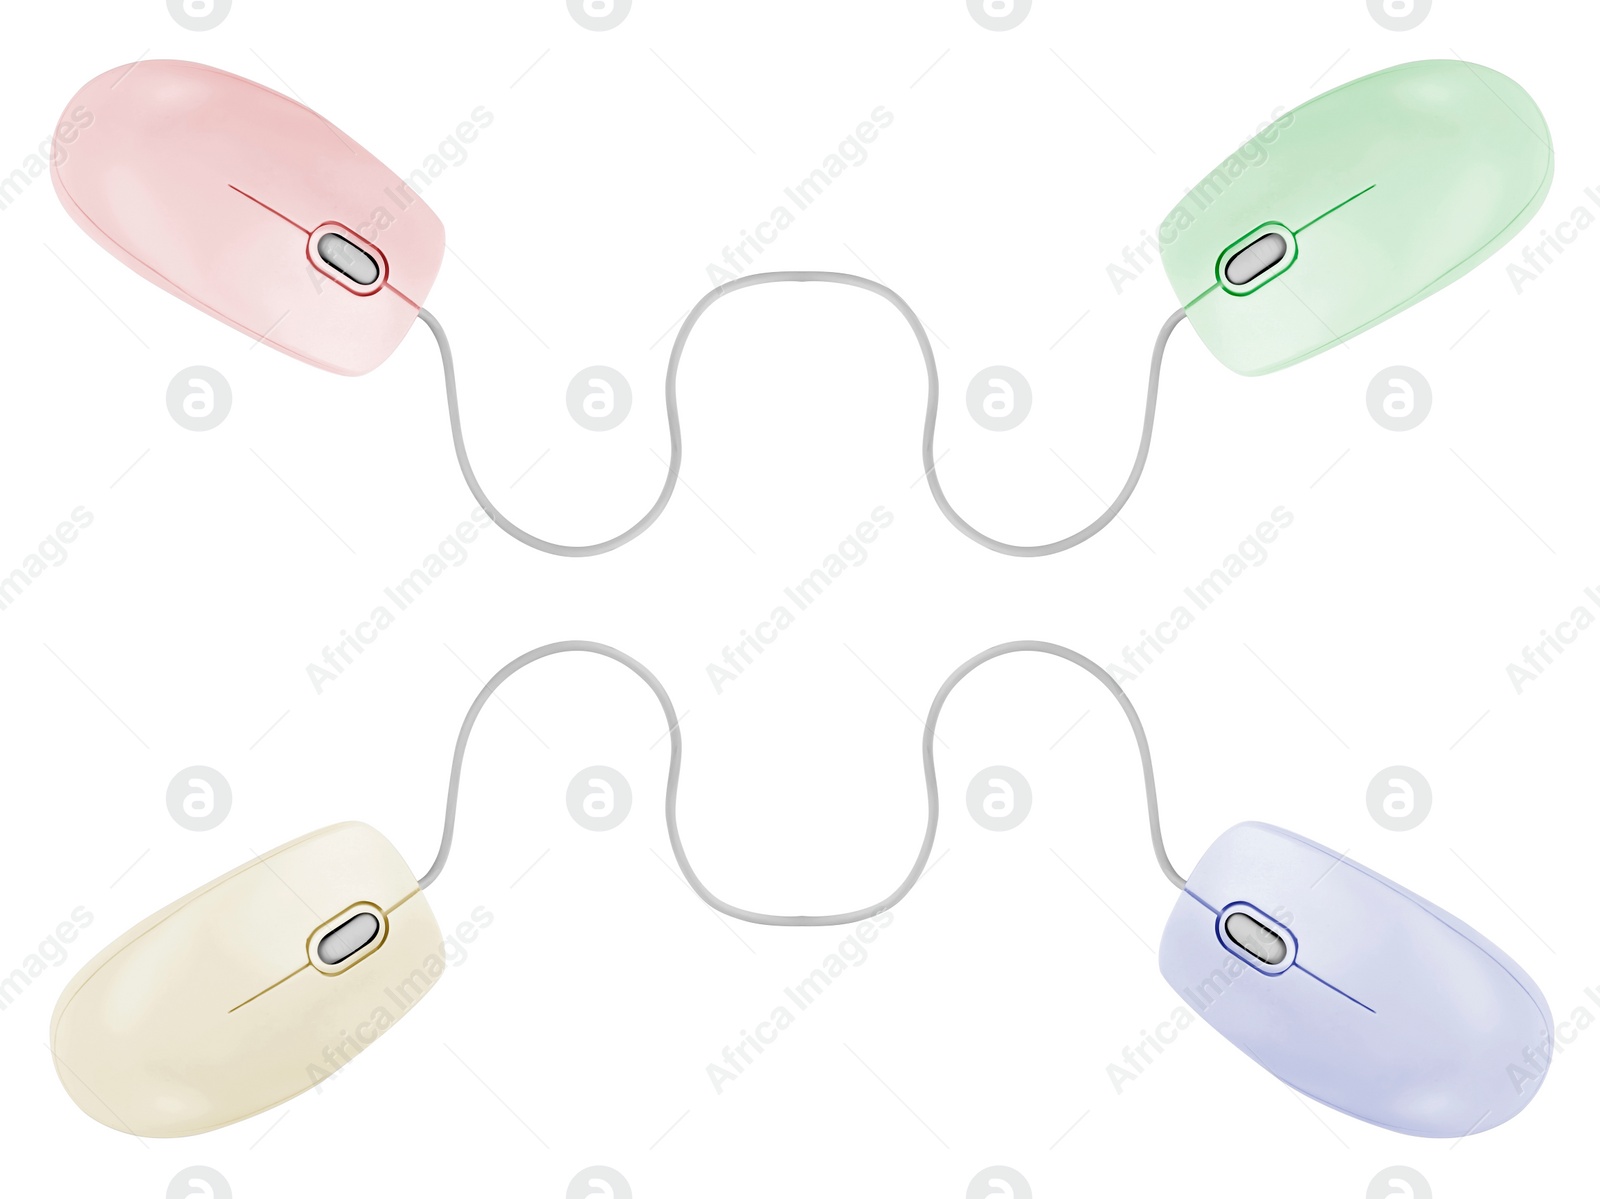 Image of Modern computer mouse on white background, different color variants